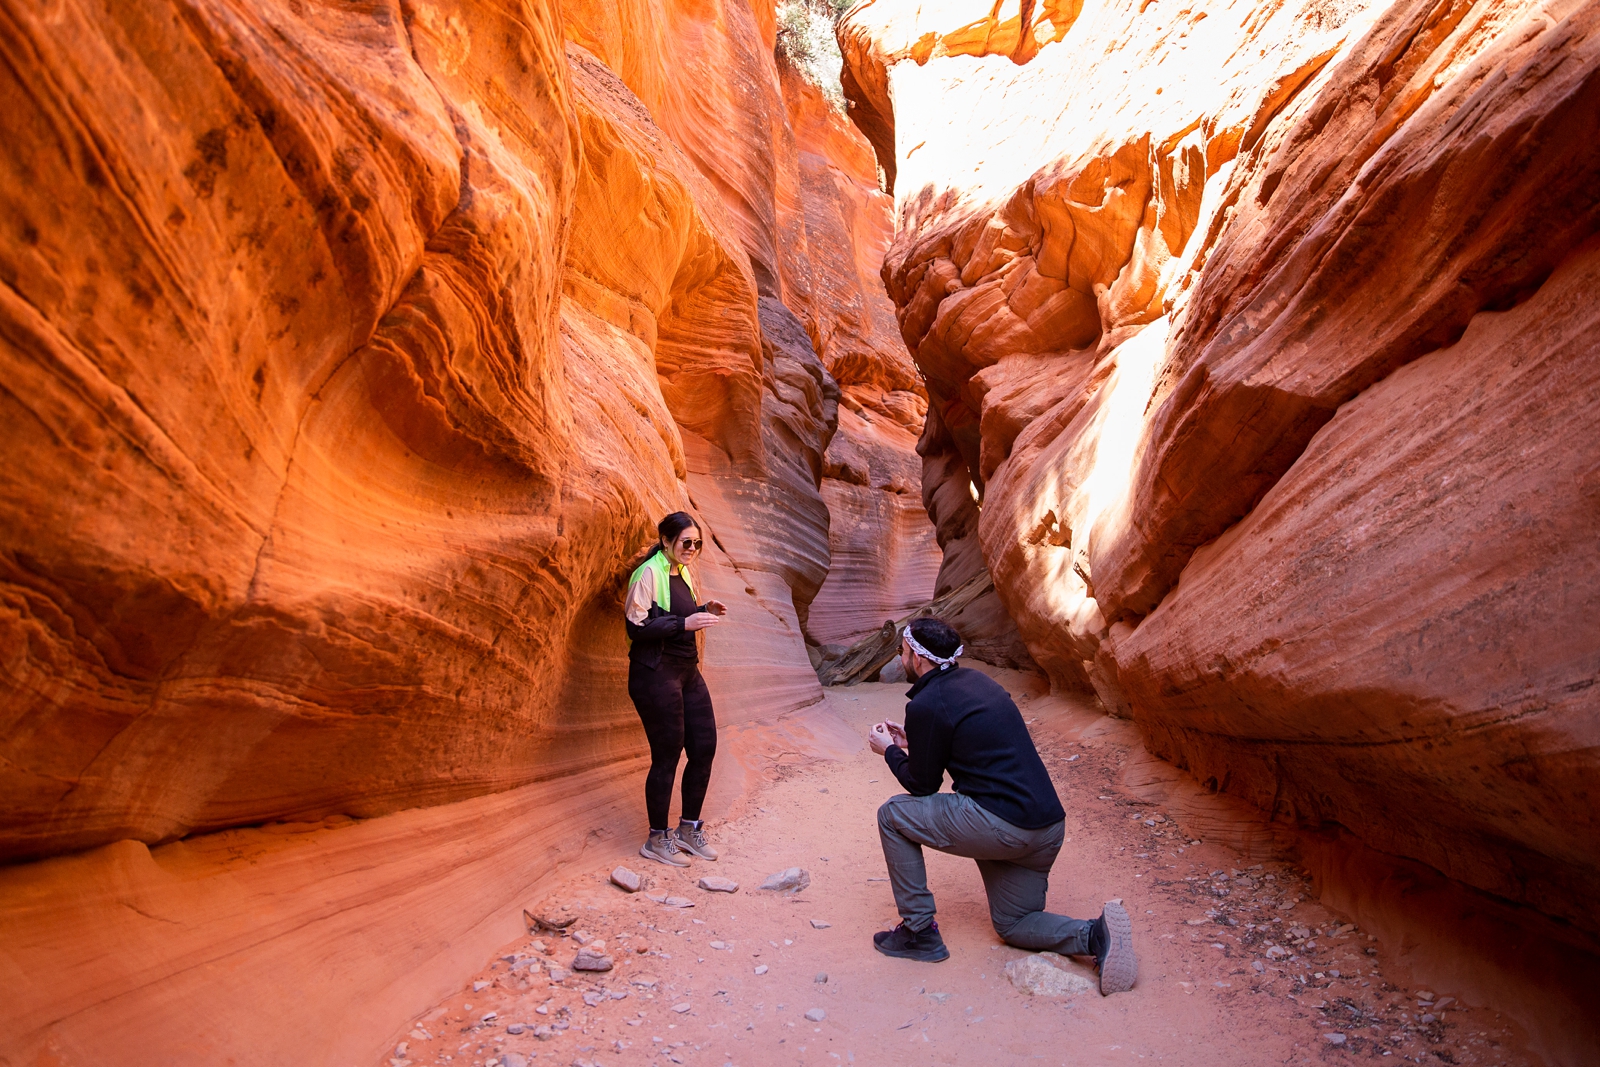 A guy down on his knee proposing to his girlfriend in the middle of the Utah slot canyon during their adventurous hike